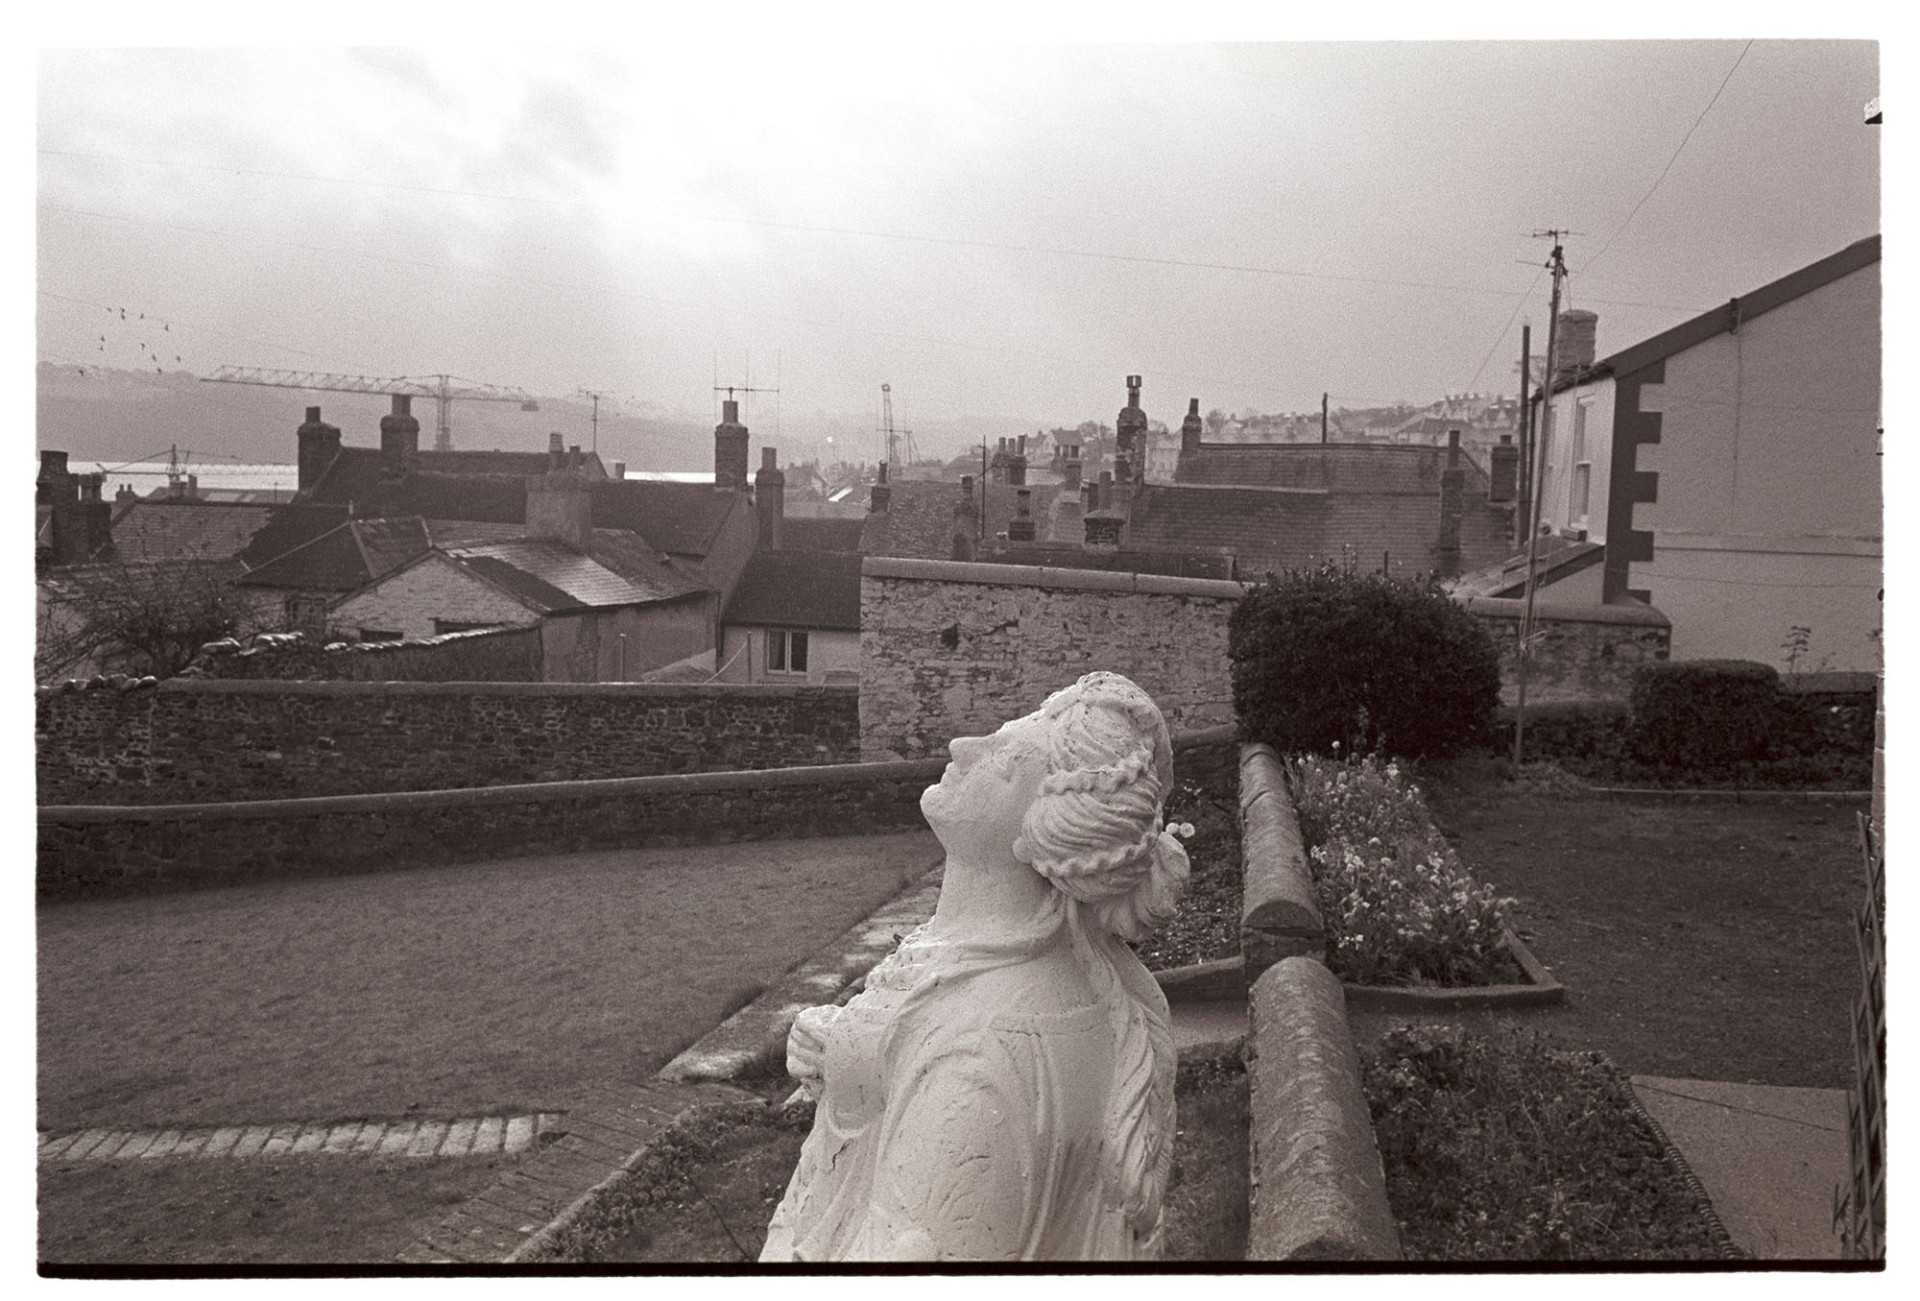 Old ship's figurehead in garden.
[An old ship's figurehead in a garden in Appledore. Houses and rooftops can be seen in the background.]